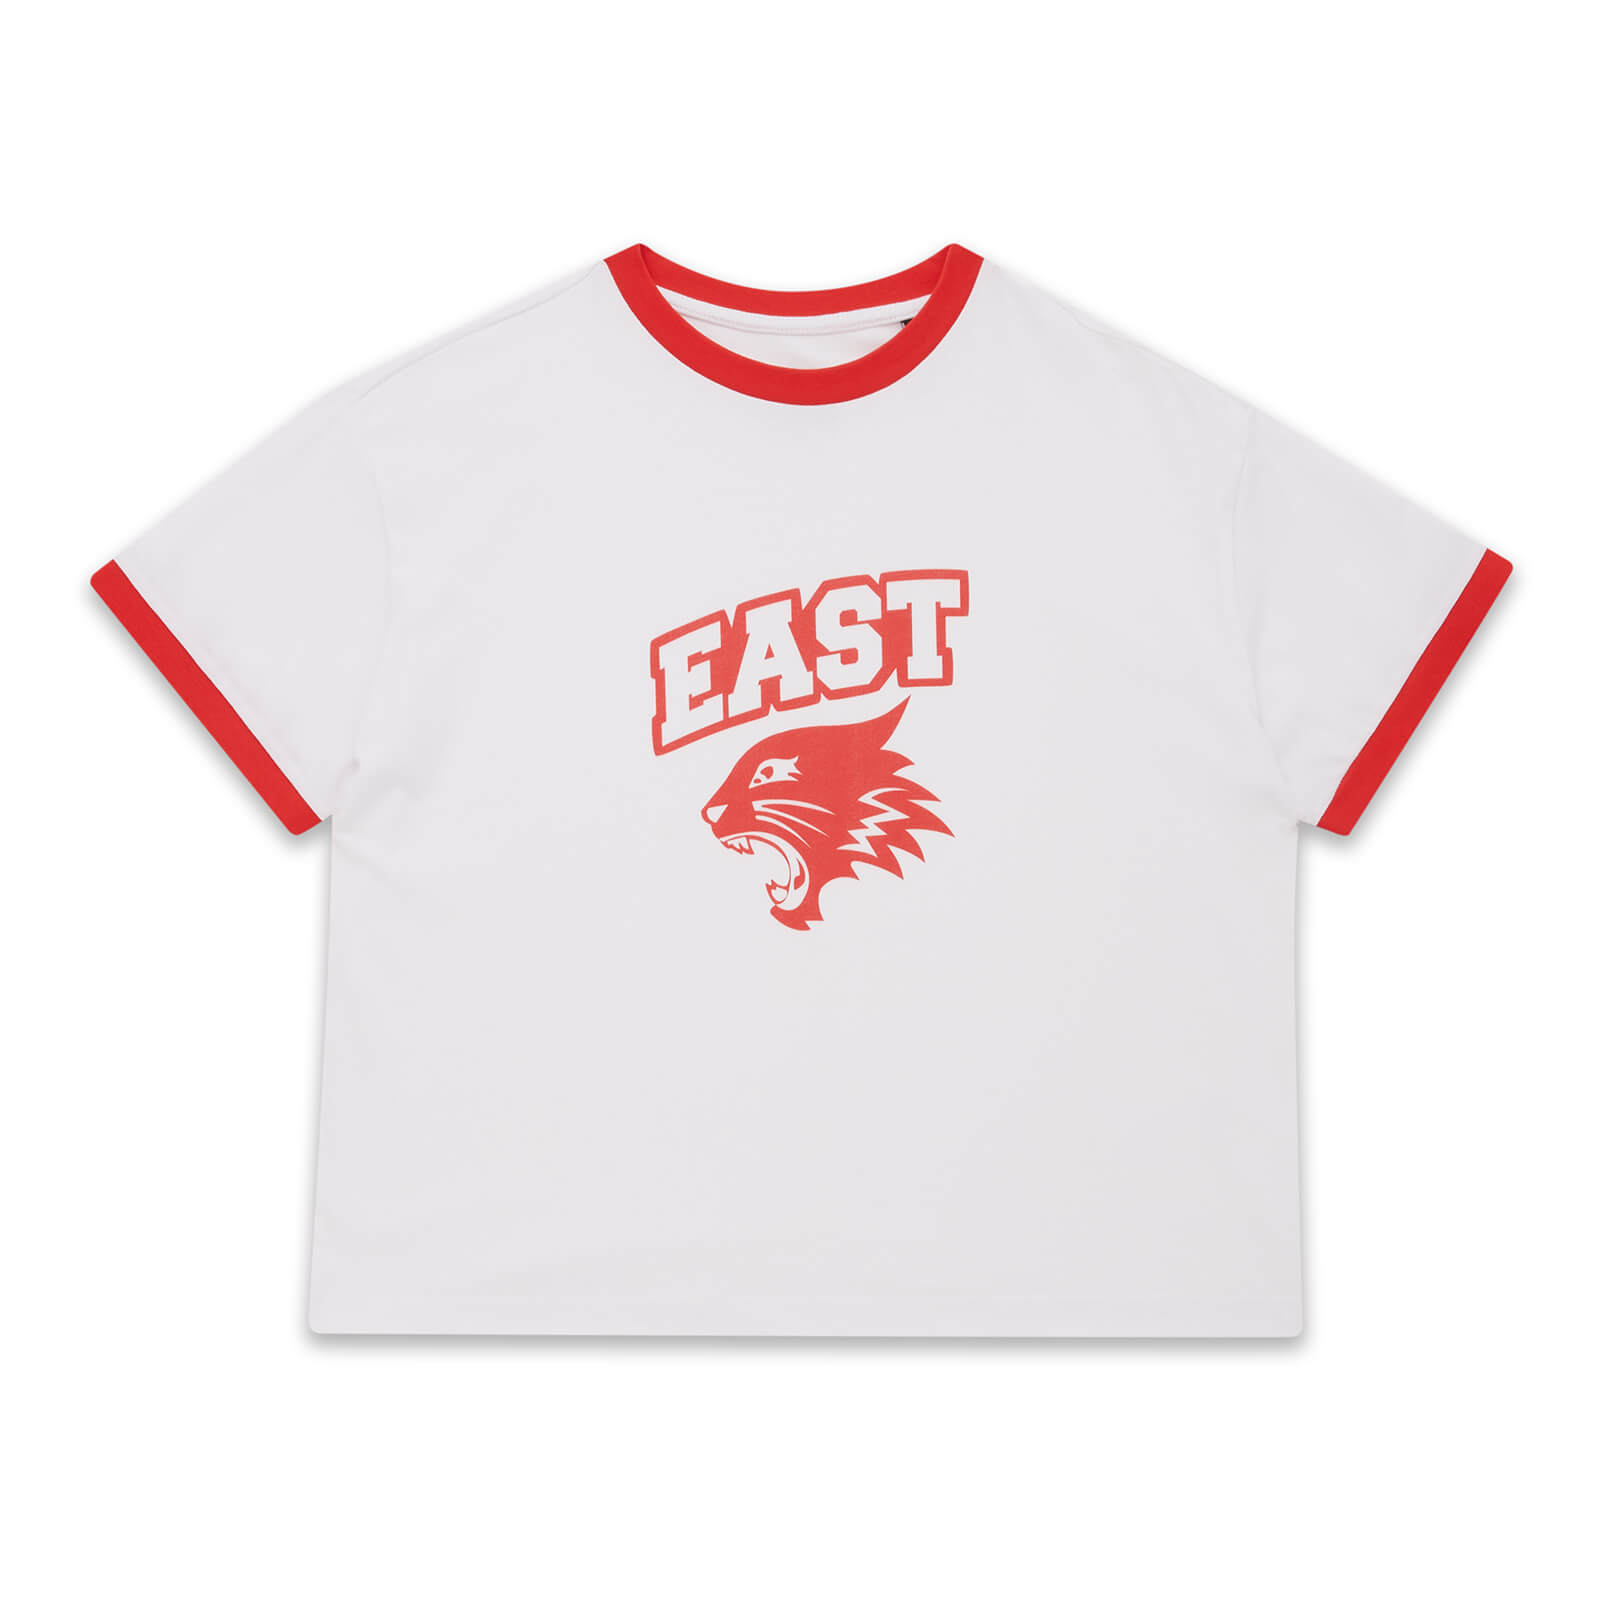 High School Musical East Women's Cropped Ringer T-Shirt - White Red - M - White Red